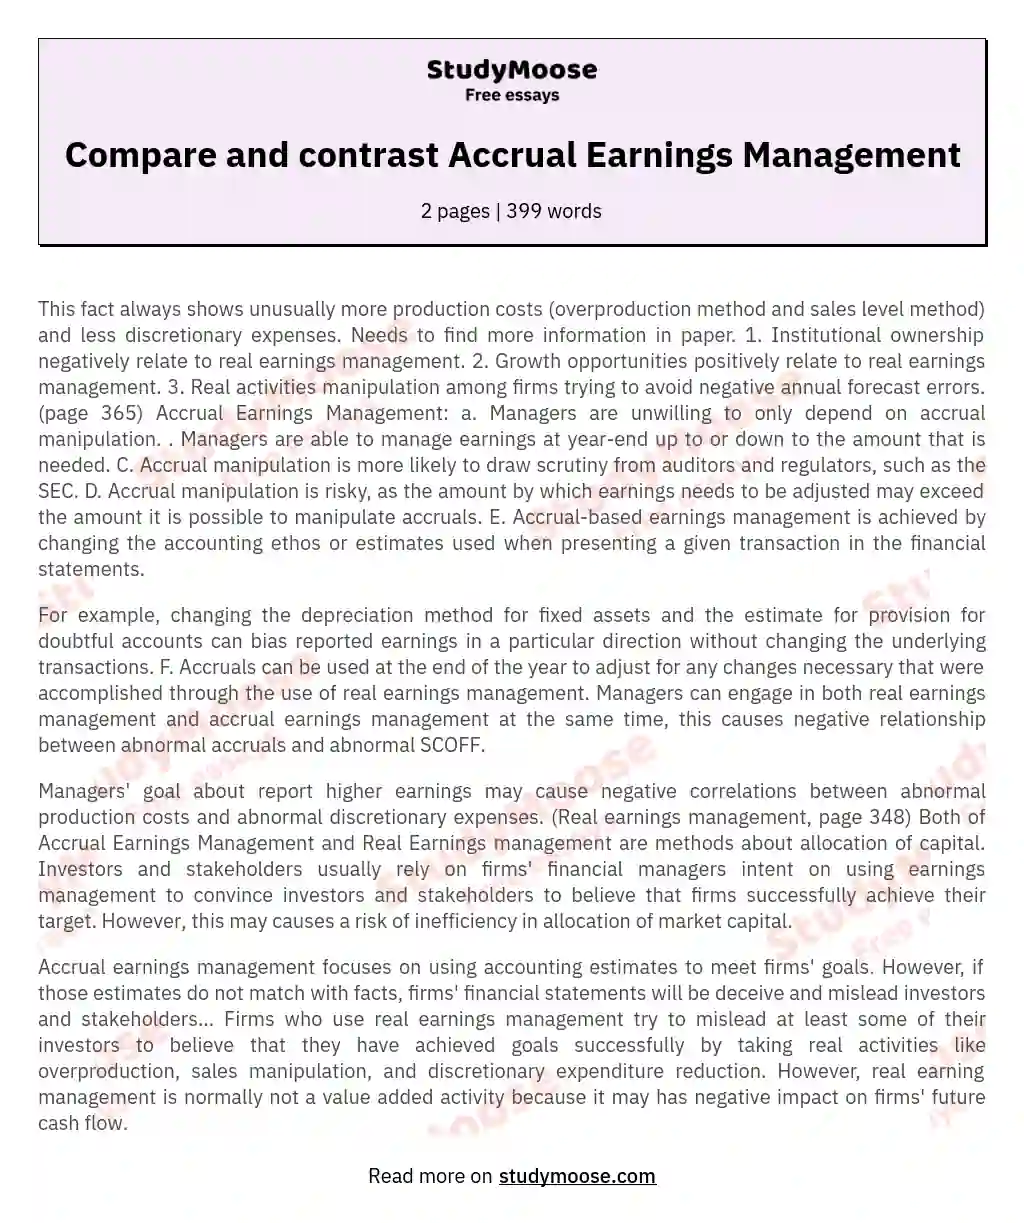 Compare and contrast Accrual Earnings Management